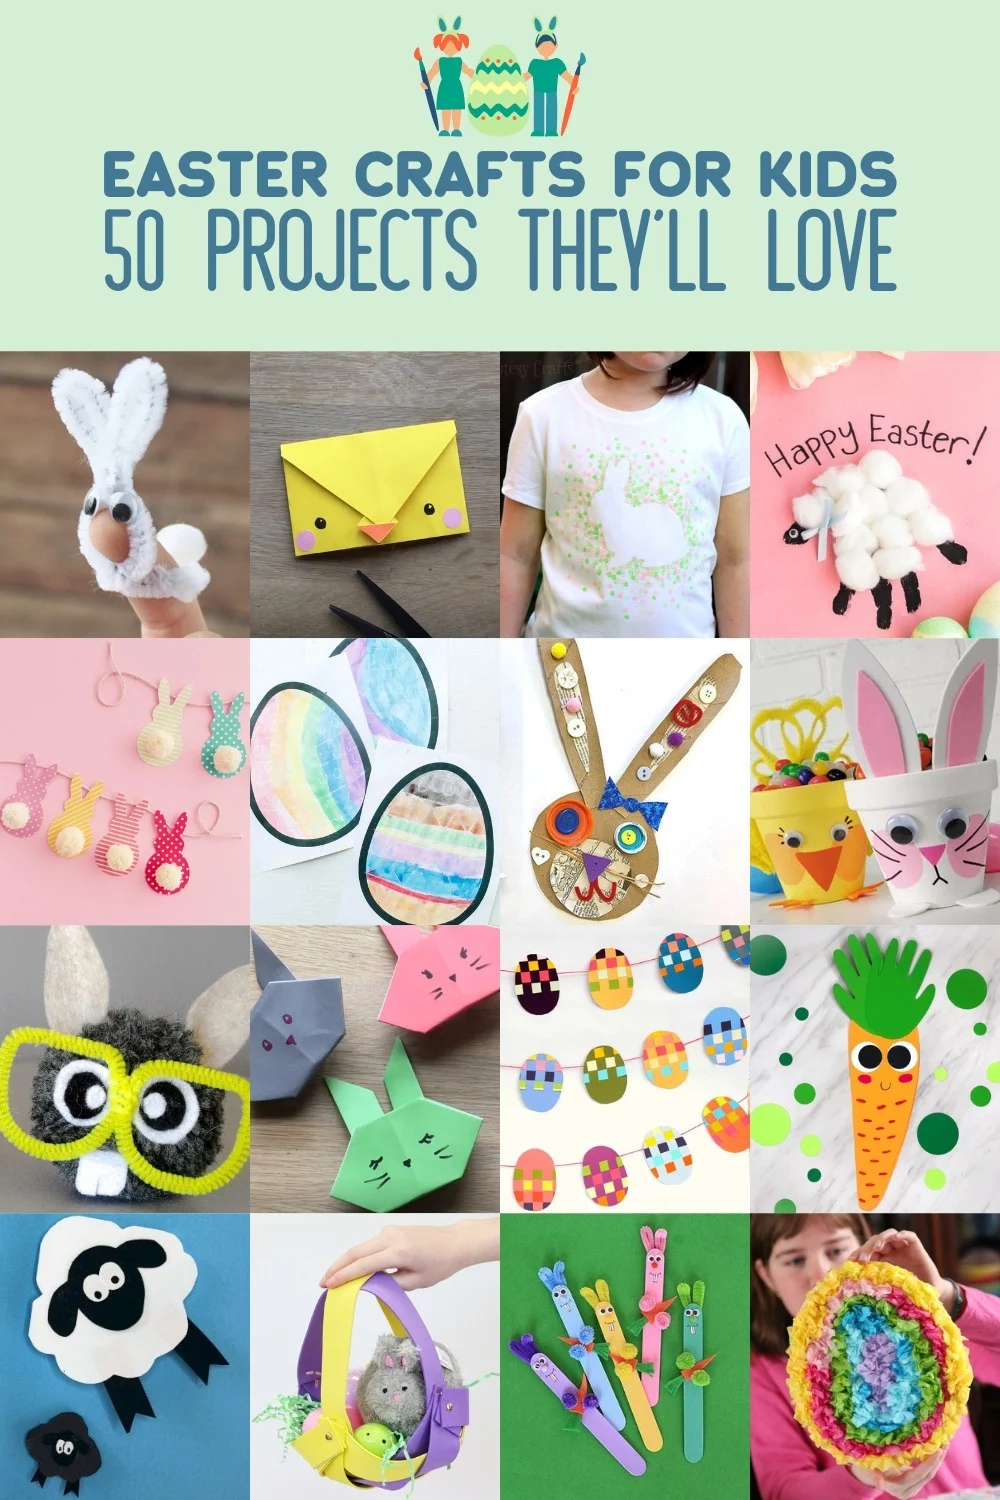 Fun Crafts and Activities for Kids Ages 8-12 - Inner Child Fun